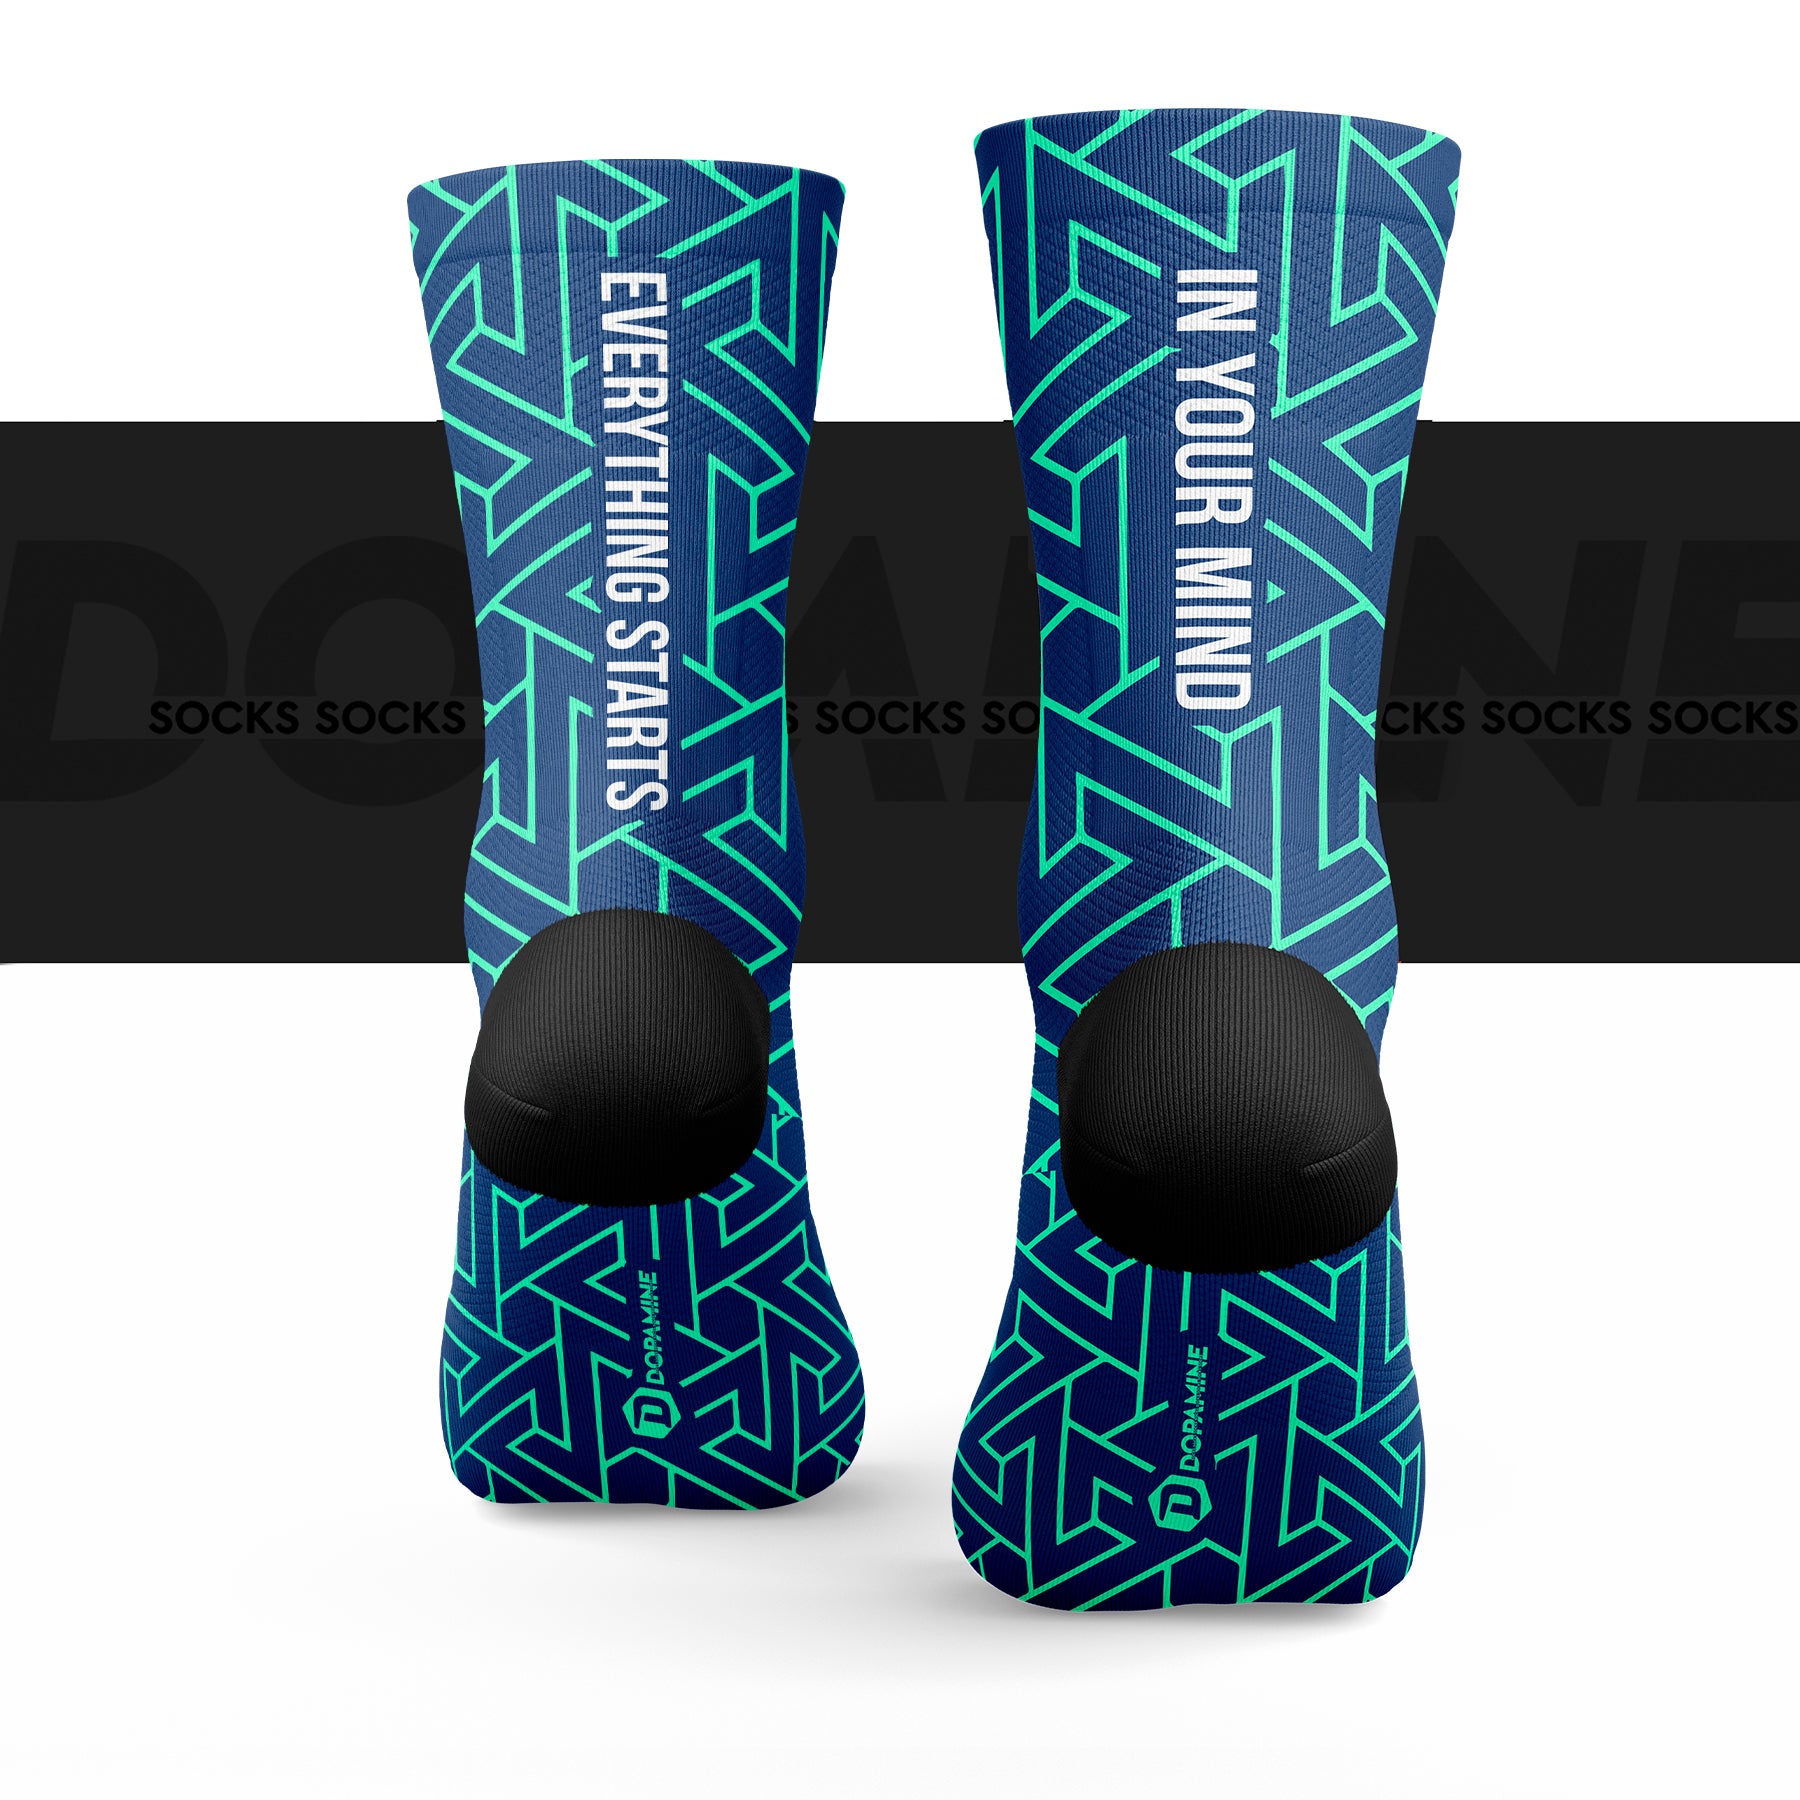 Calcetín Deportivo SOCK SPORT+ EVERYTHING STARTS IN YOUT MIND - DOPAMINEOFICIAL